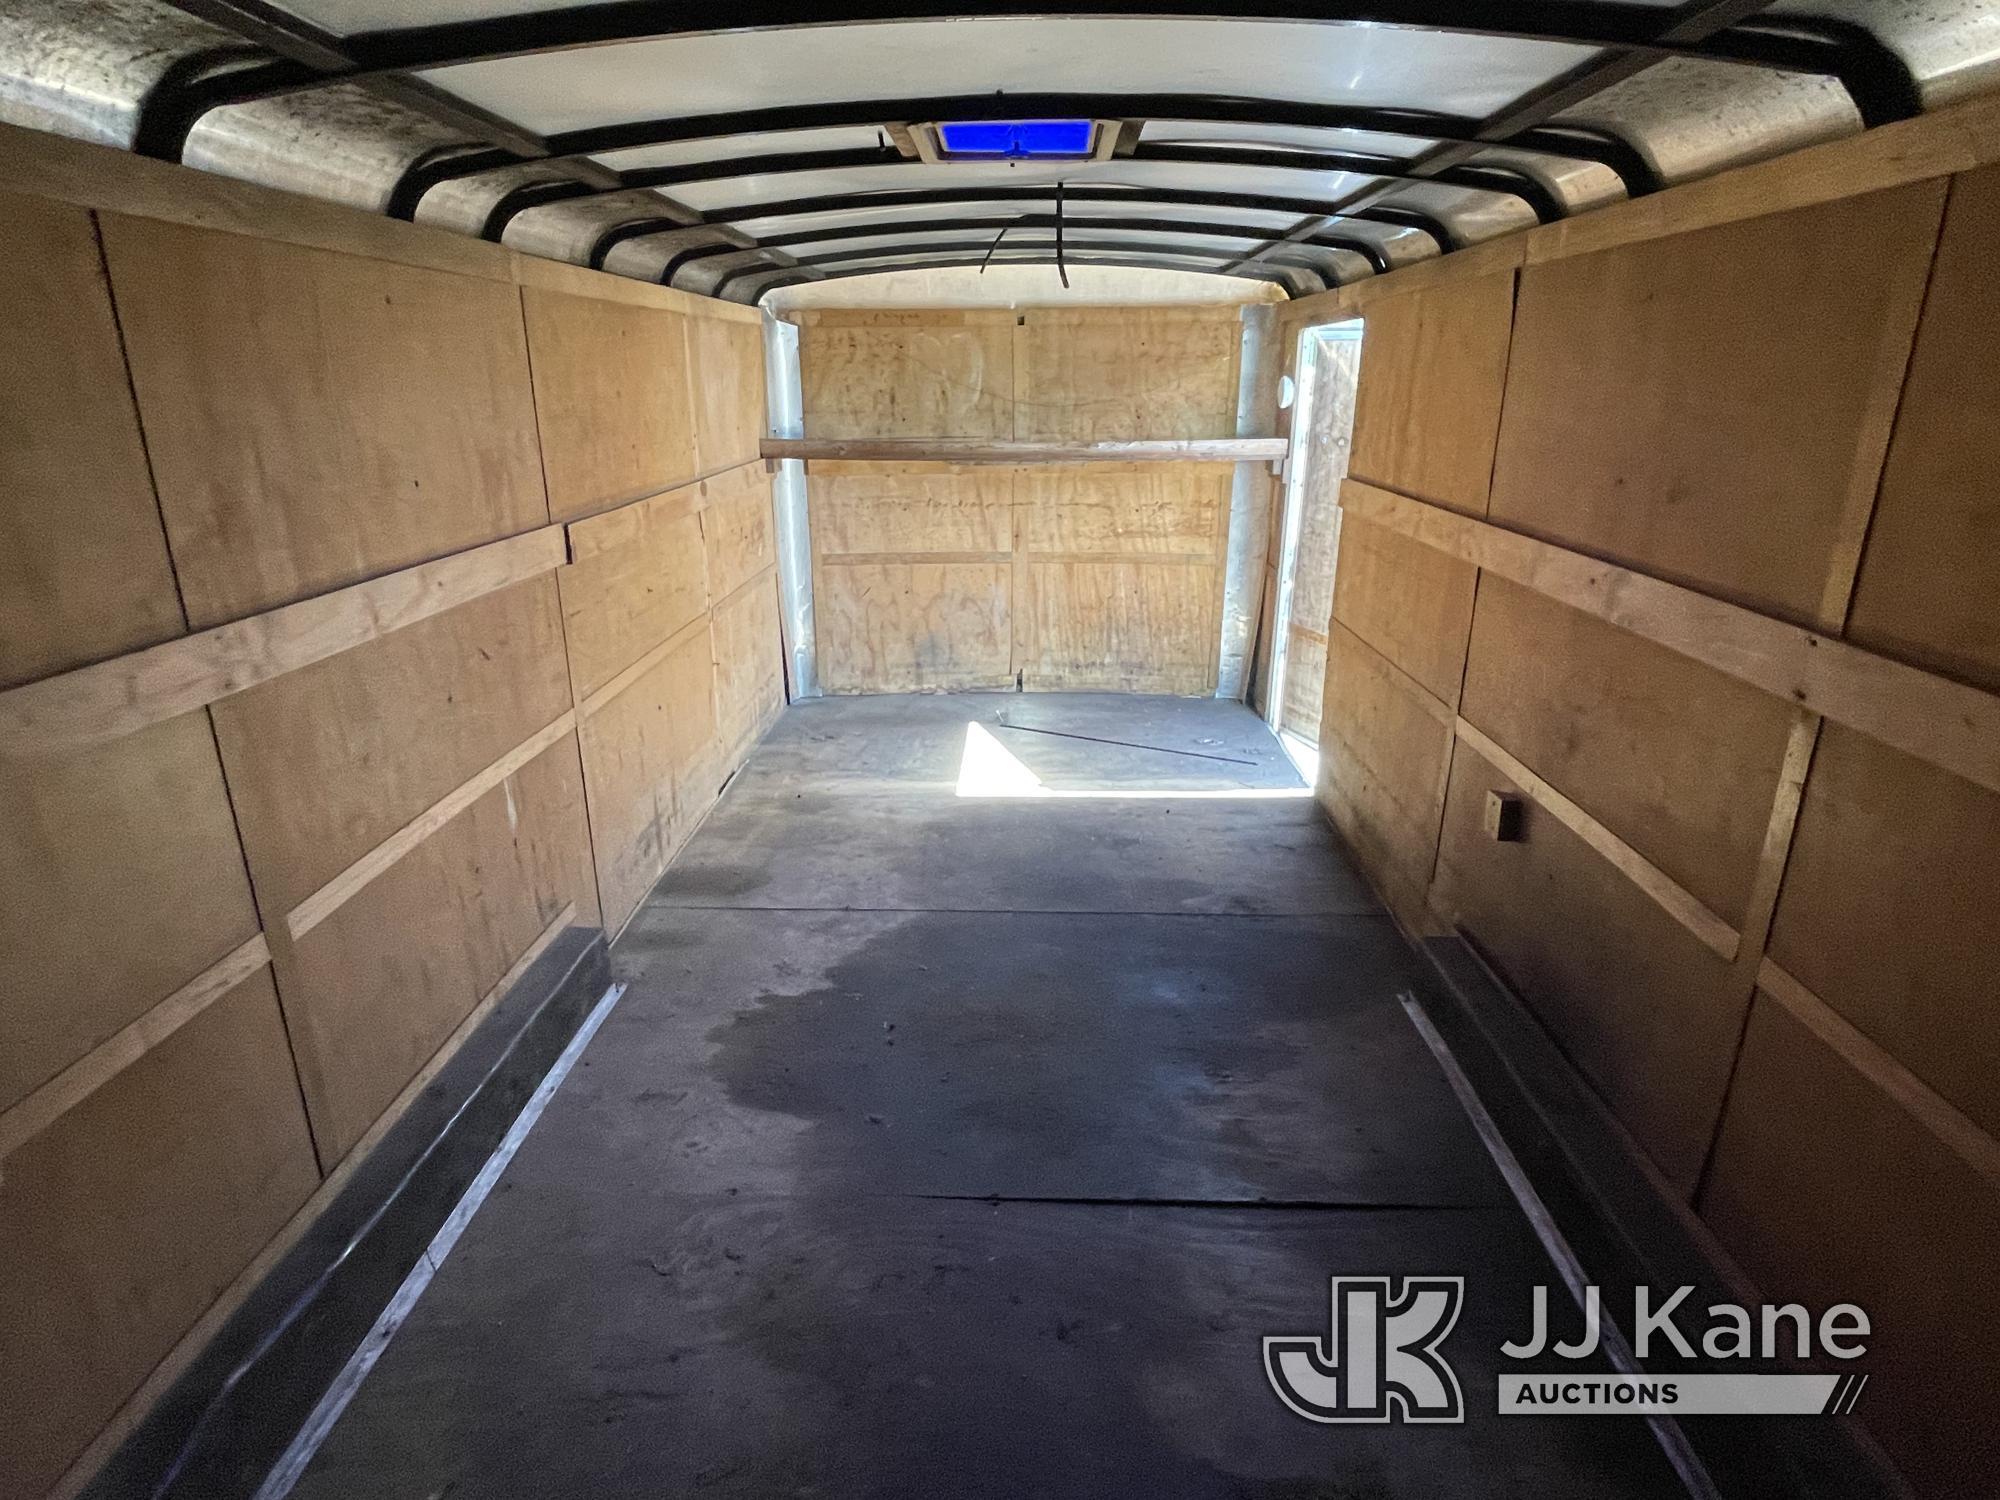 (Plymouth Meeting, PA) 2009 Carry-On REM 8x20CGR-7K T/A Enclosed Cargo Trailer Body & Rust Damage